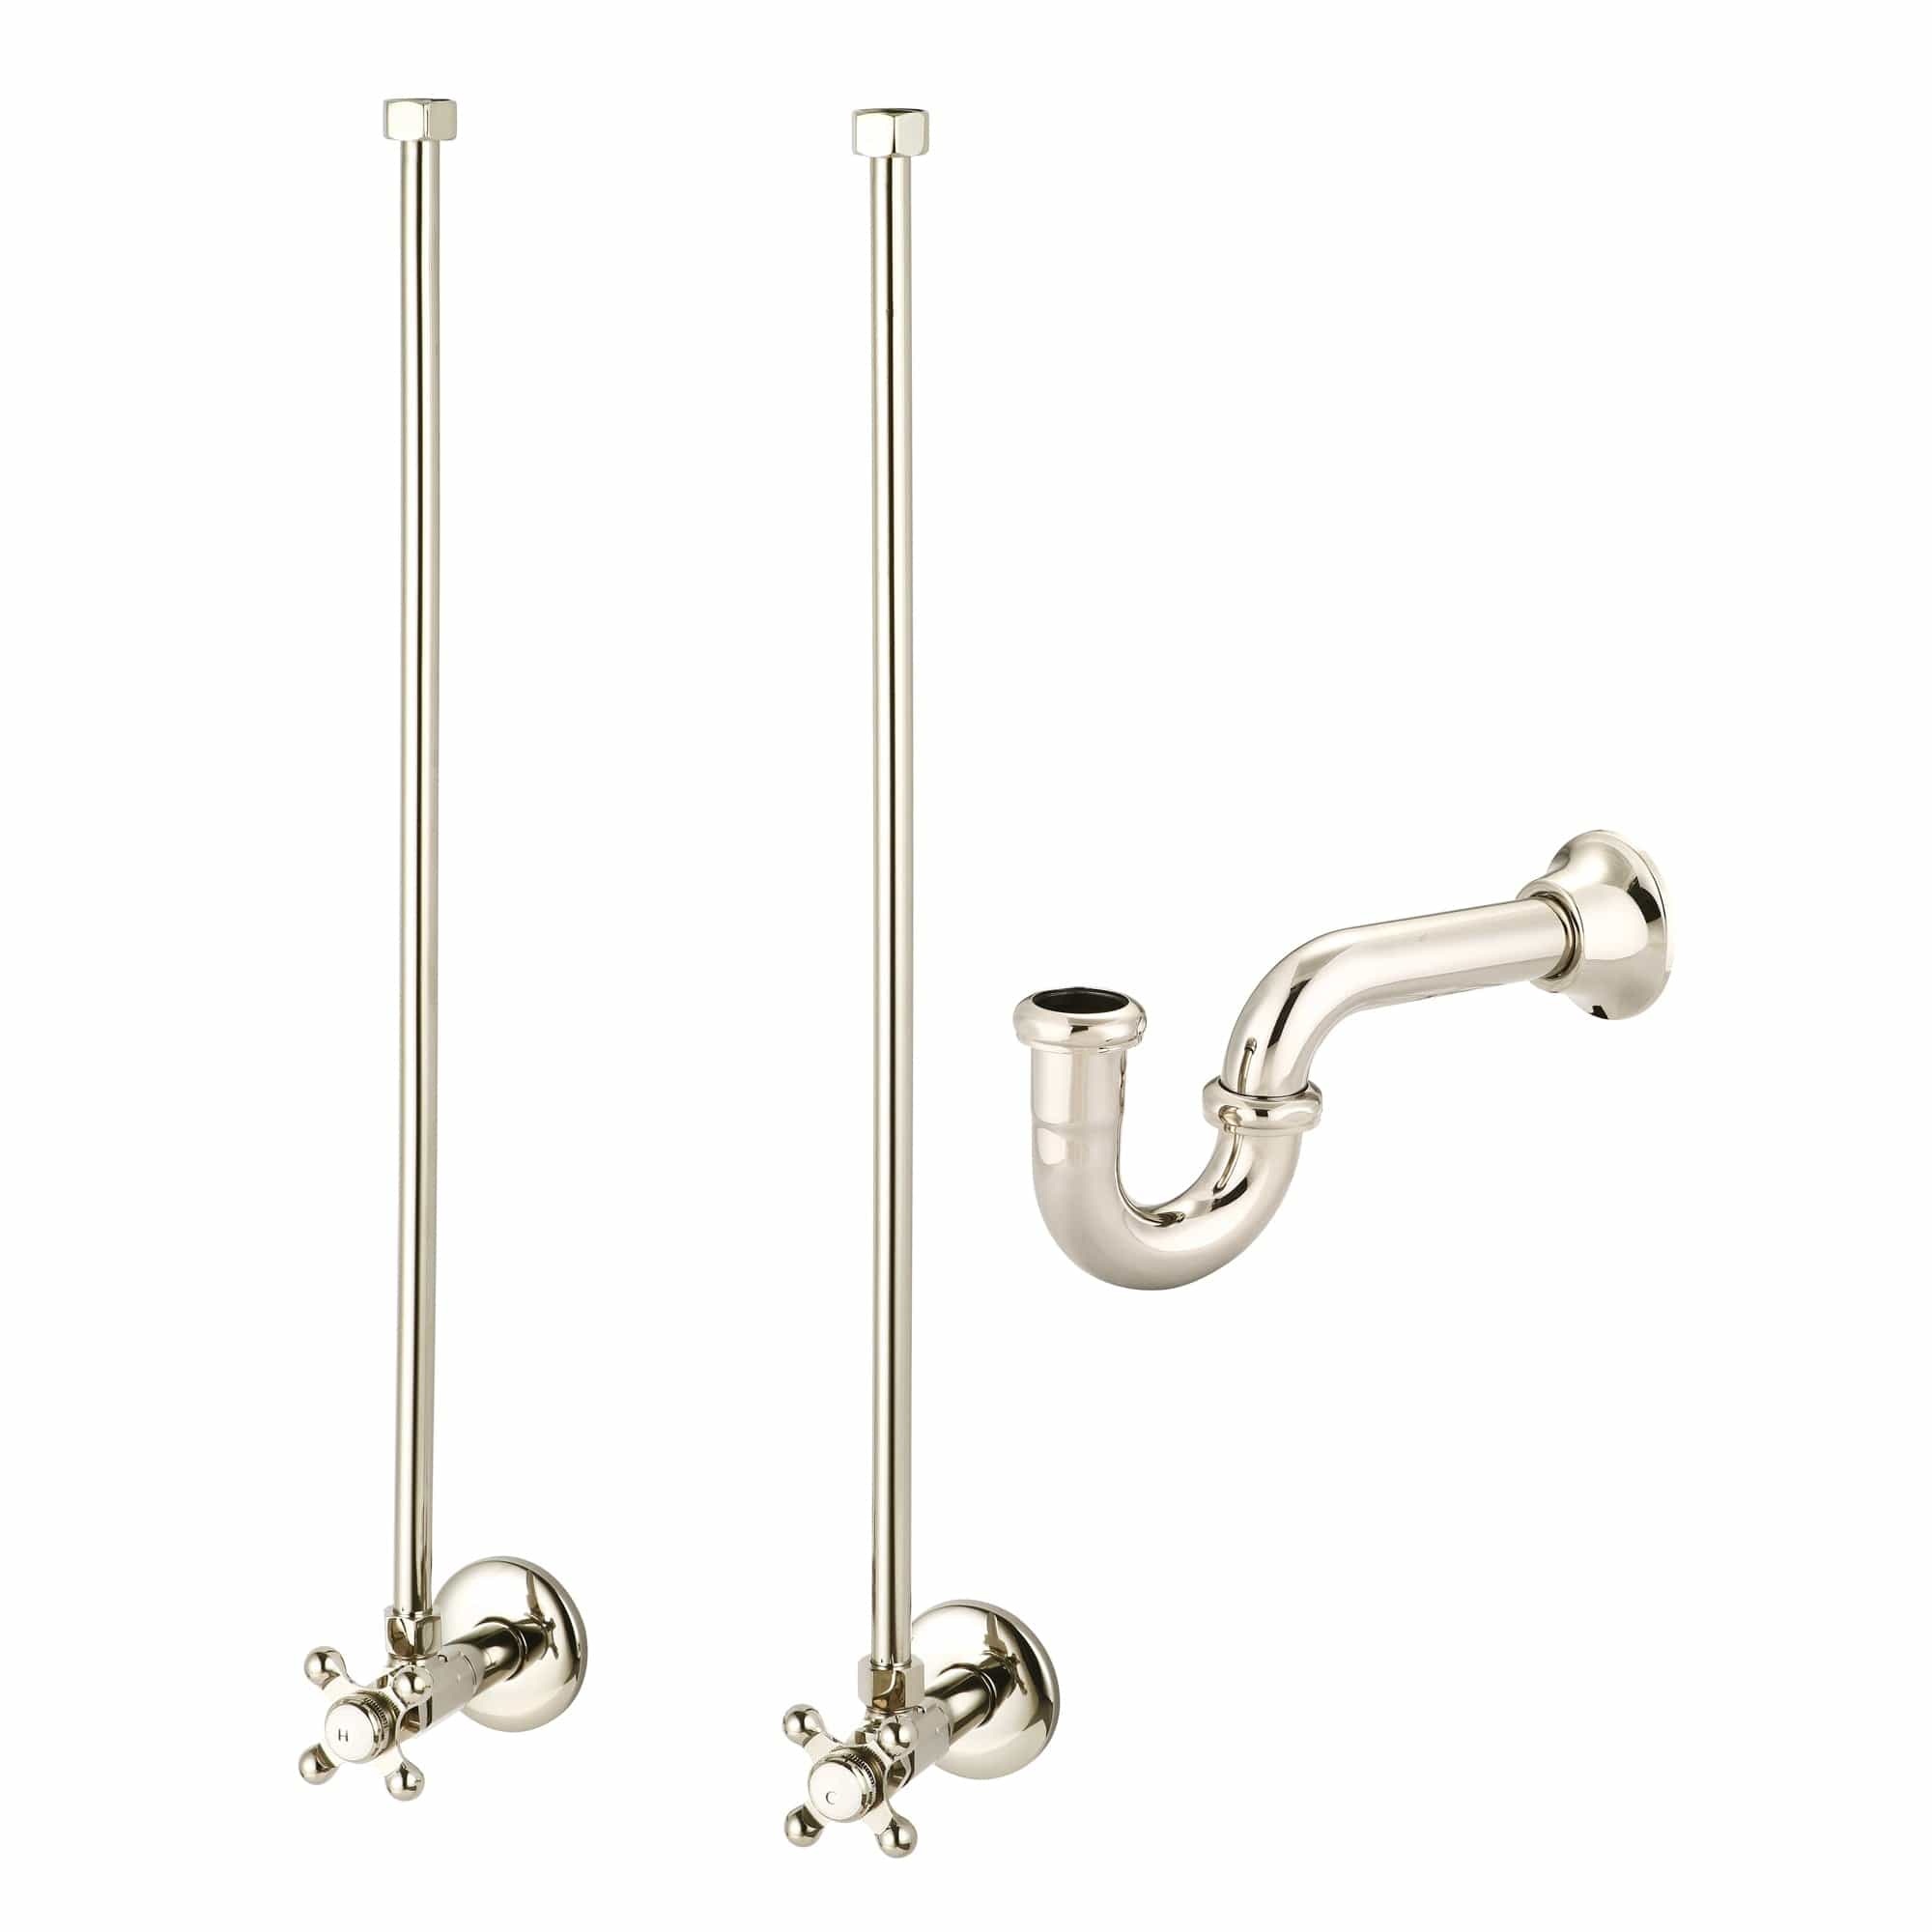 Empire 30 Inch Wide Single Wash Stand, P-Trap, Counter Top with Basin, F2-0012 Faucet and Mirror included in Polished Nickel (PVD) Finish - Molaix732030762701EP30E-0512